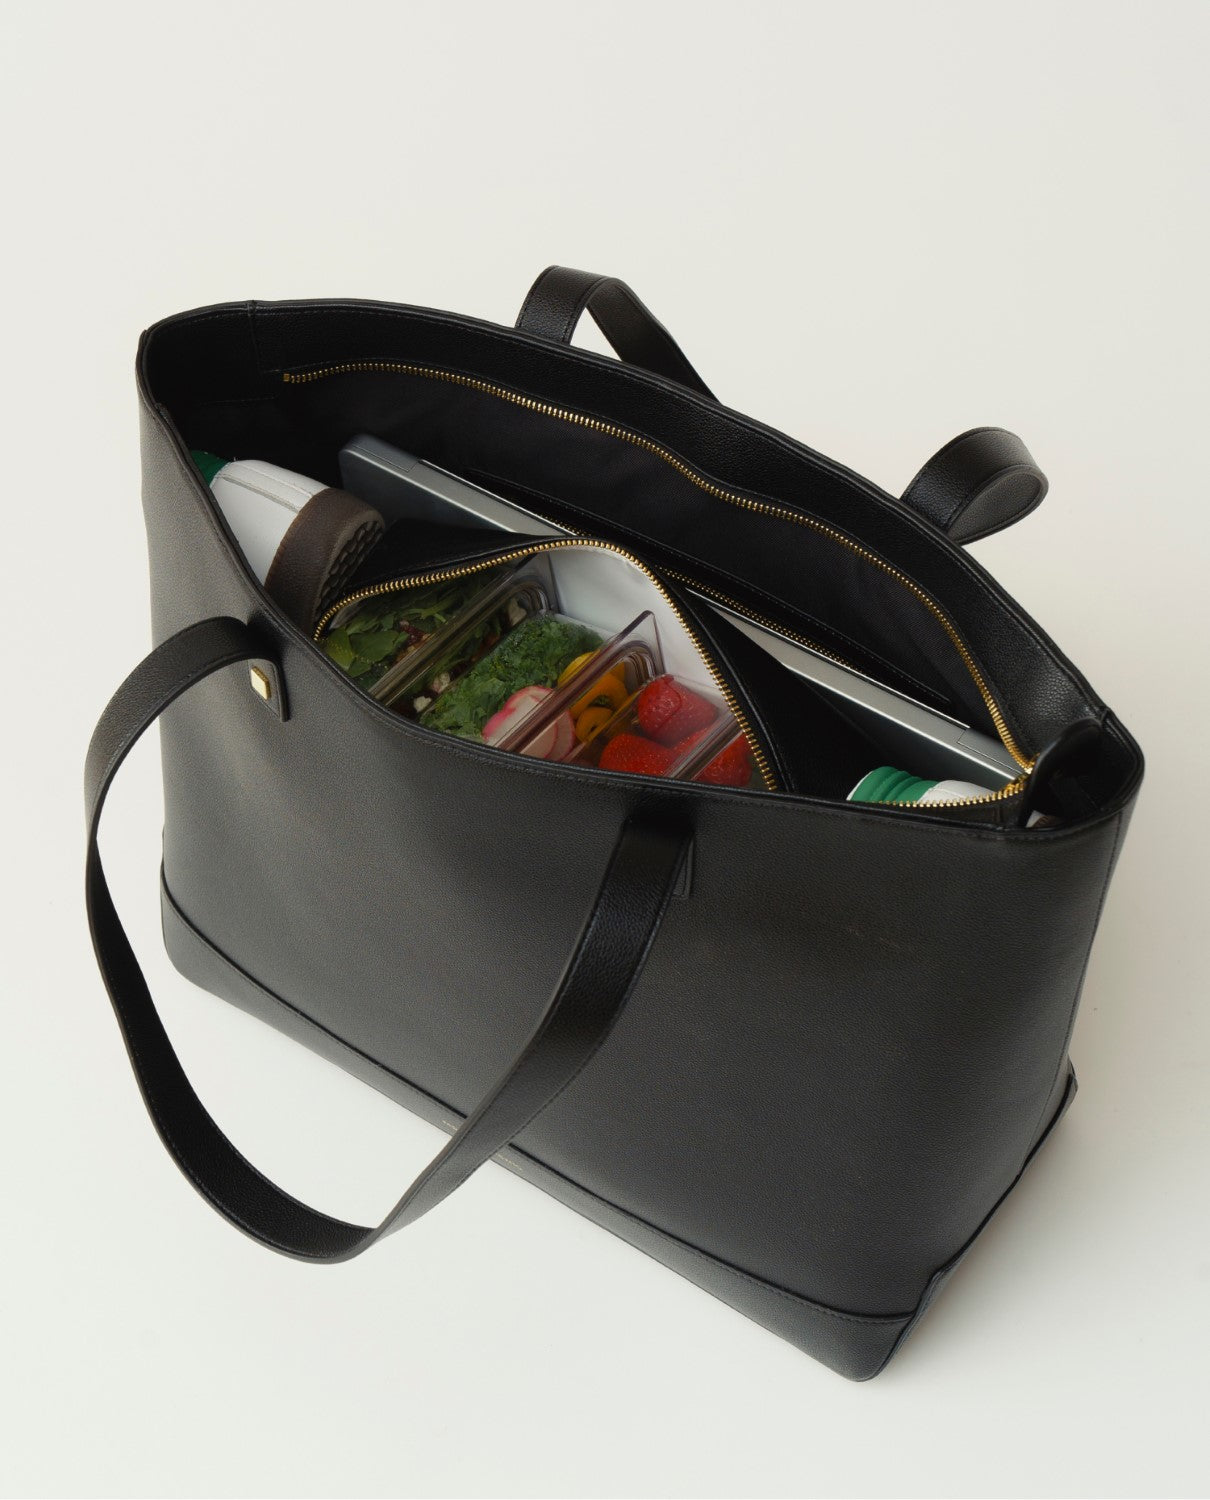 THE TOTE - BLACK by Modern Picnic